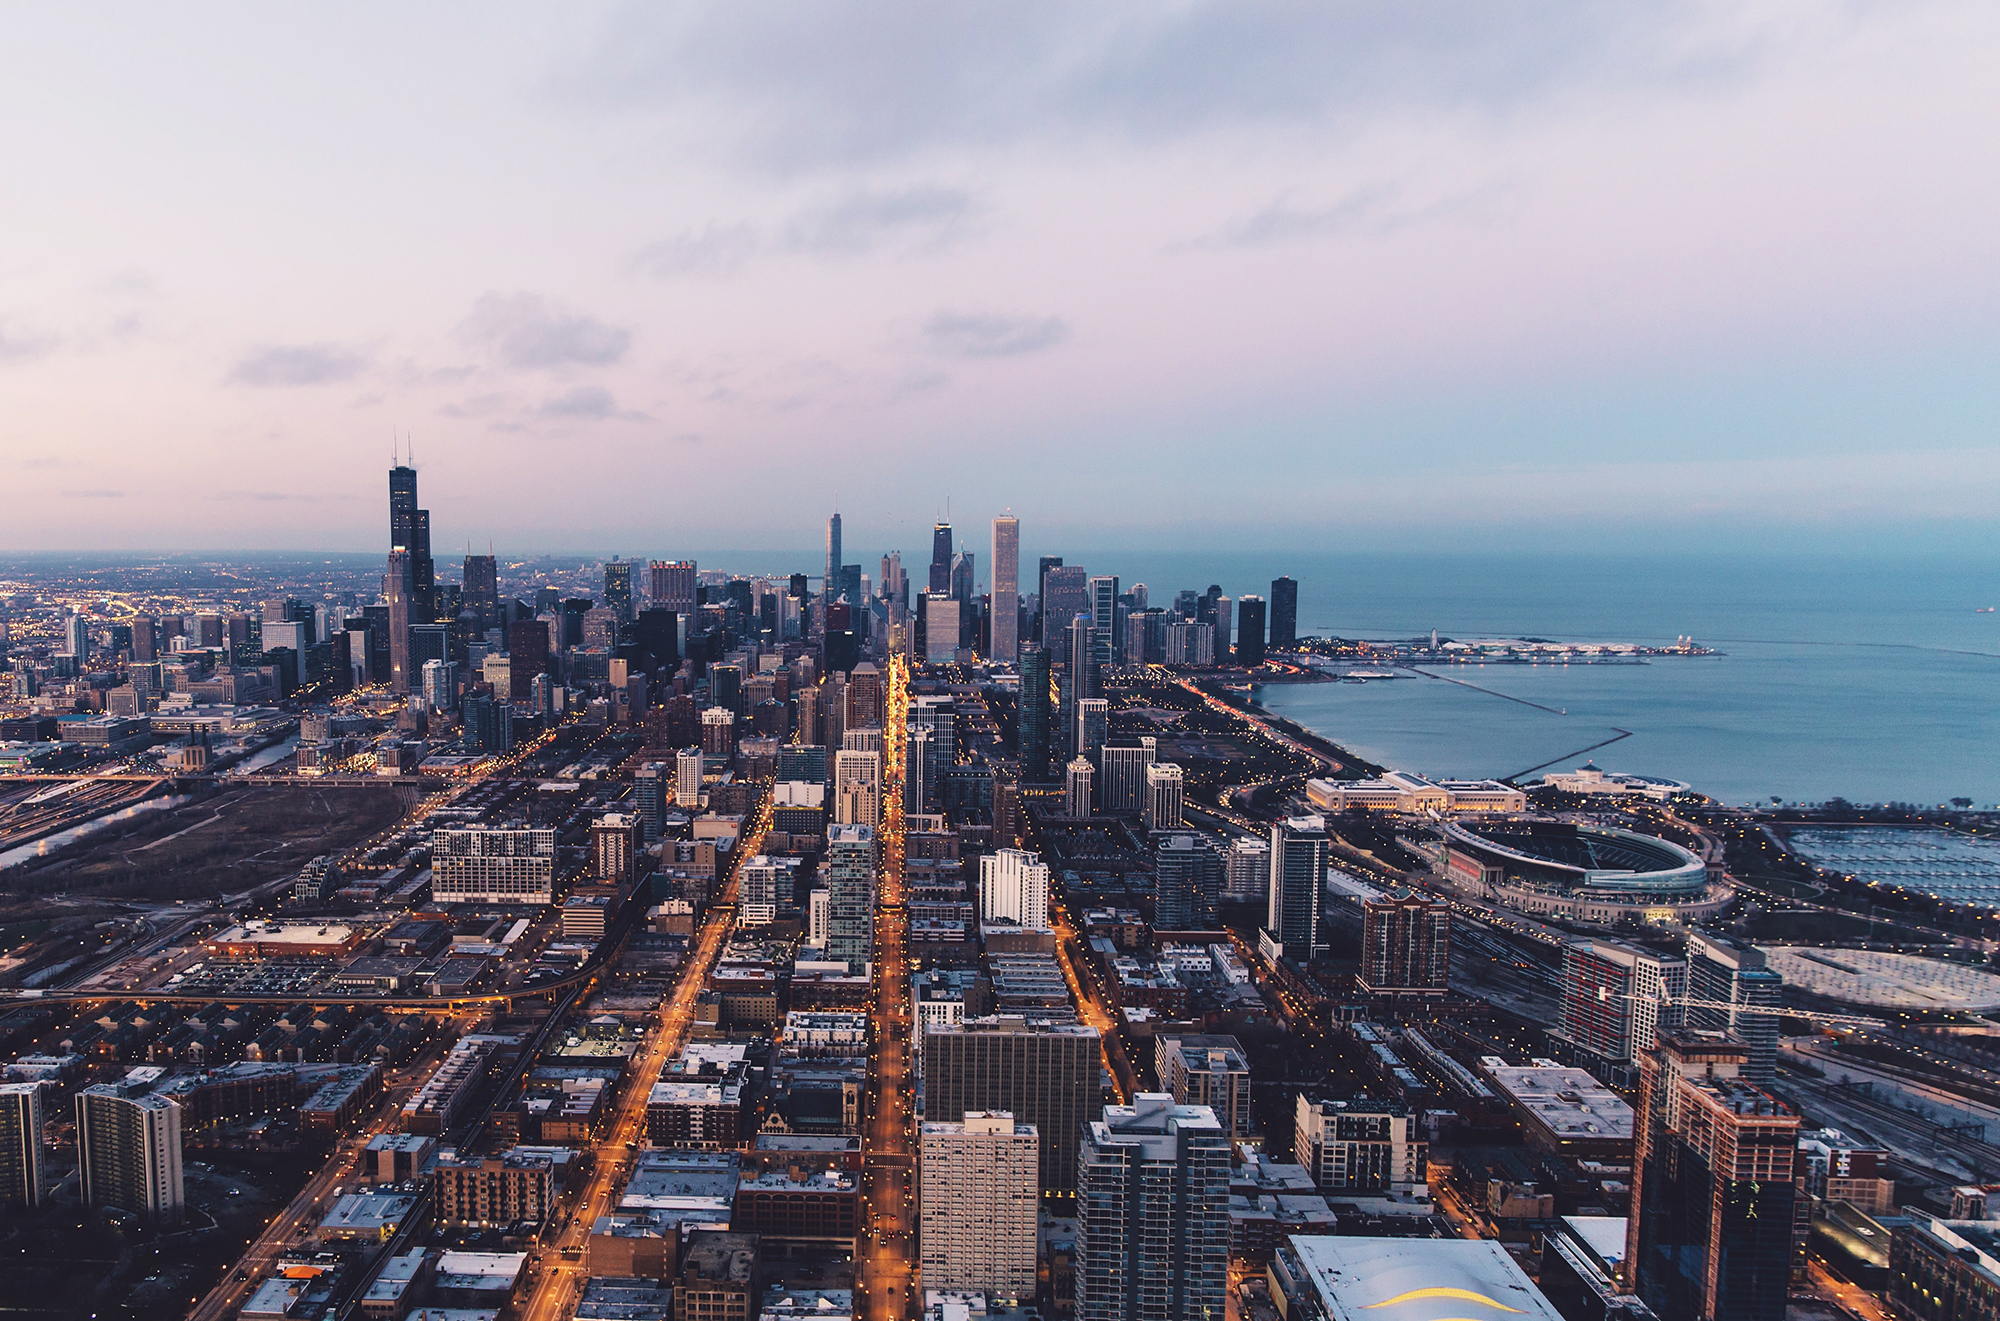 drone image of the city discussing chicago's 311 system